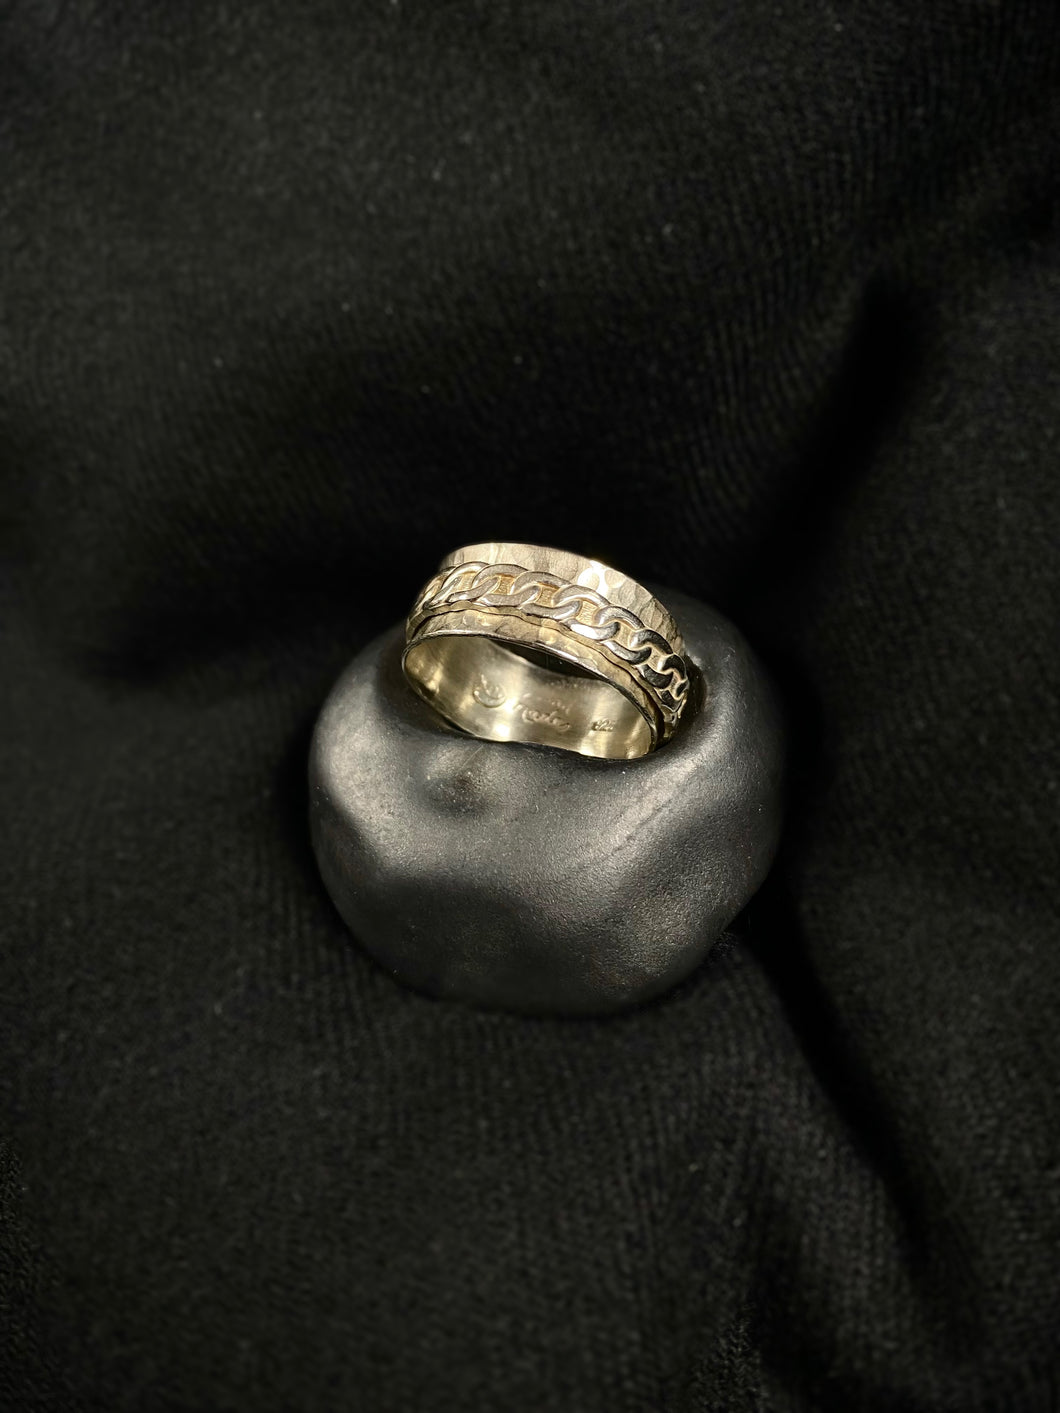 Diana Morrissey 925 Sterling Silver Ring